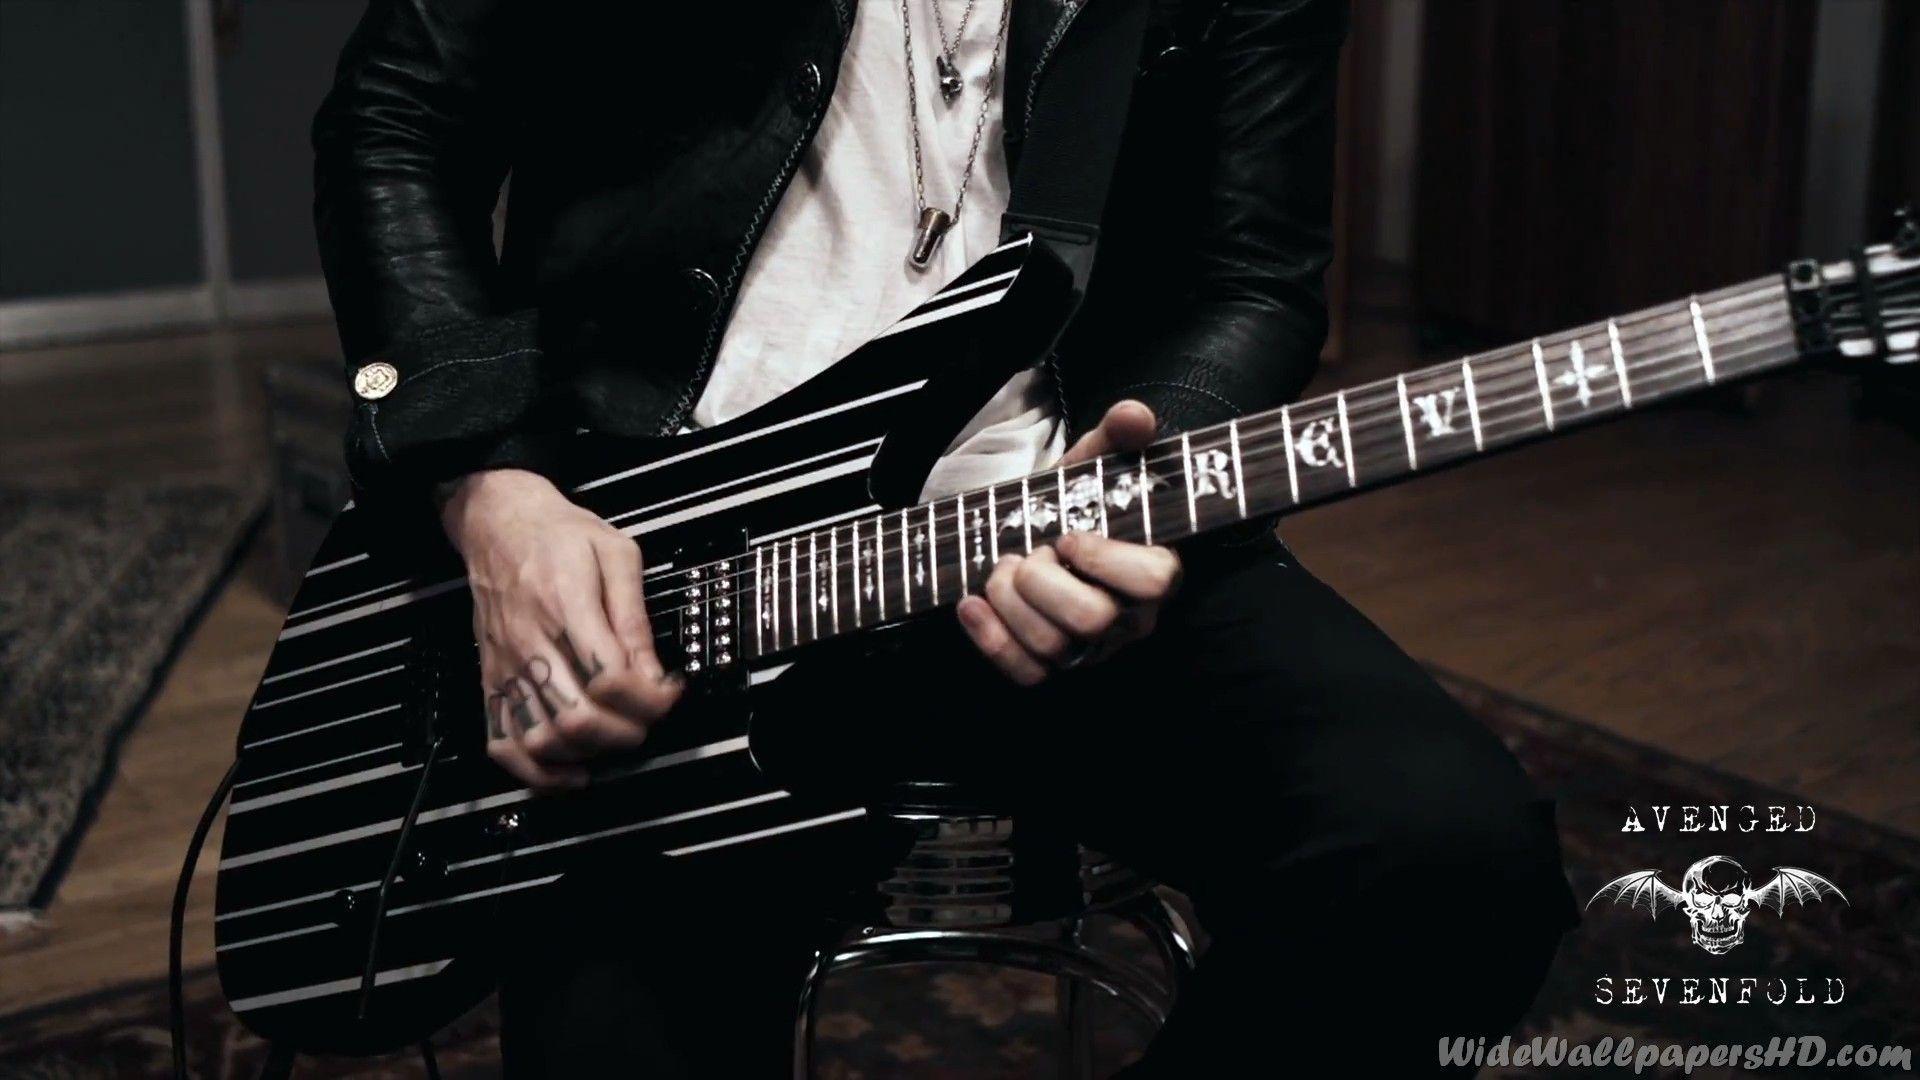 Synyster Gates Wallpapers